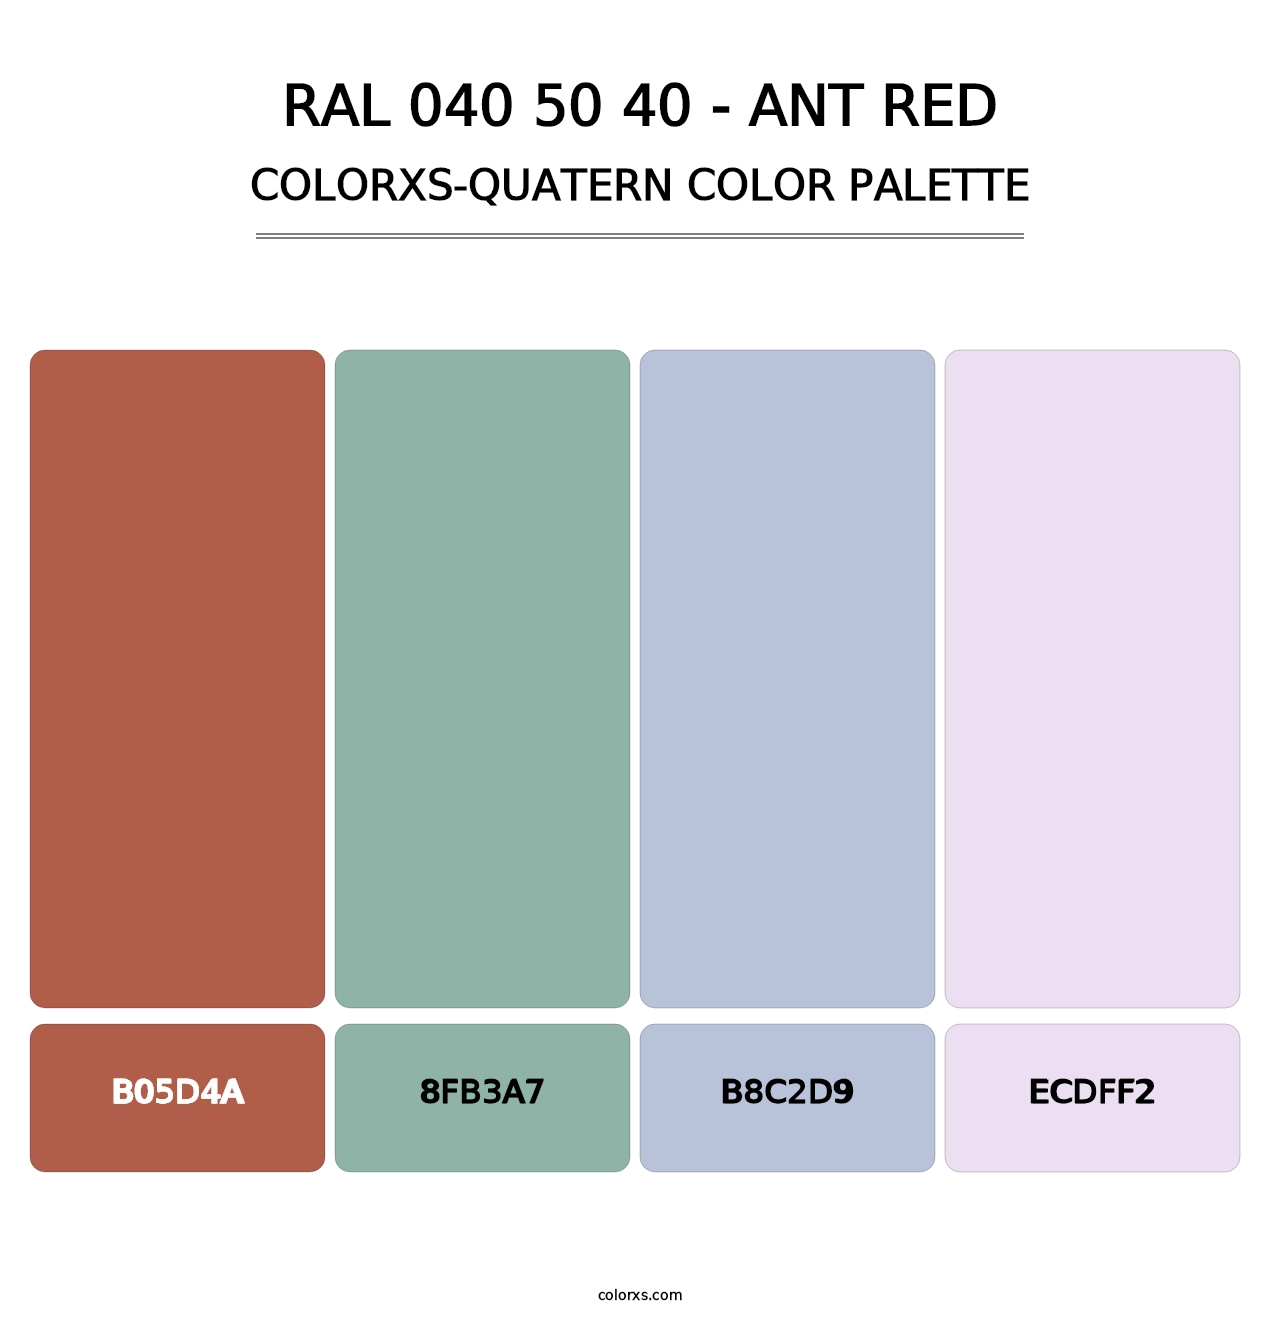 RAL 040 50 40 - Ant Red - Colorxs Quatern Palette